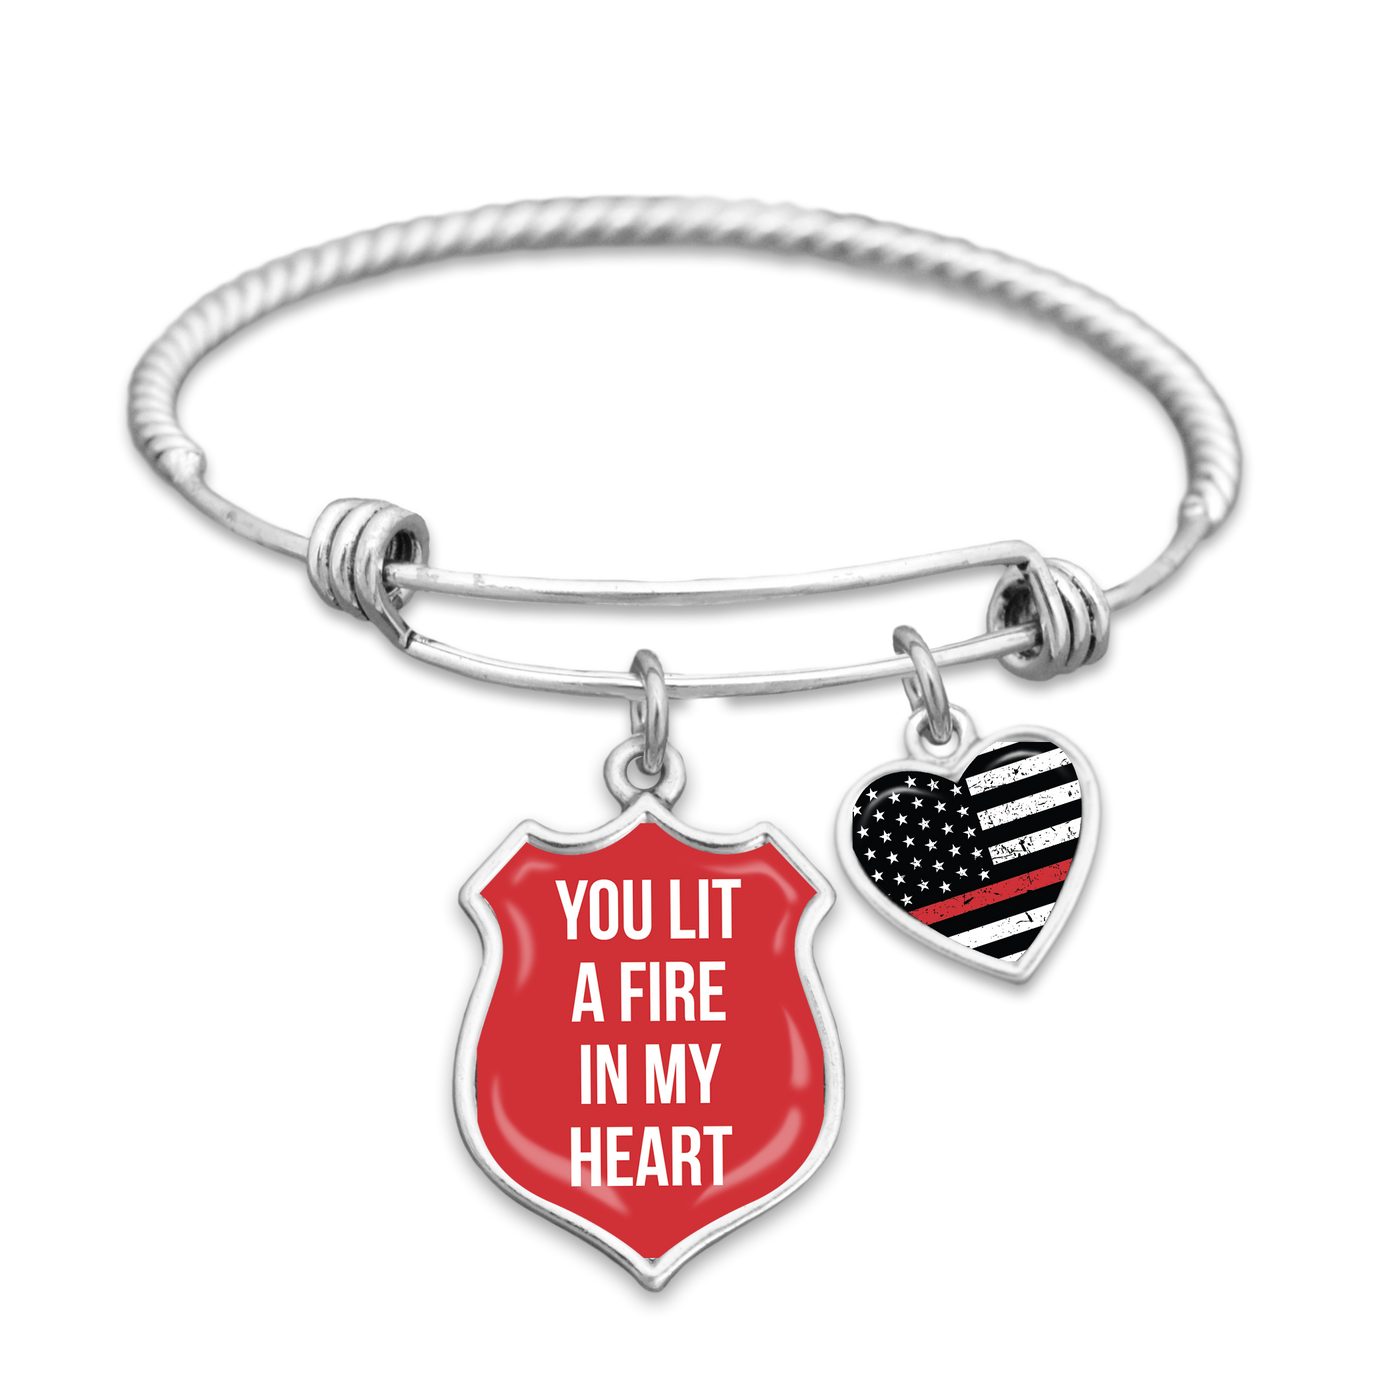 You Lit A Fire In My Heart Thin Red Line Charm Bracelet